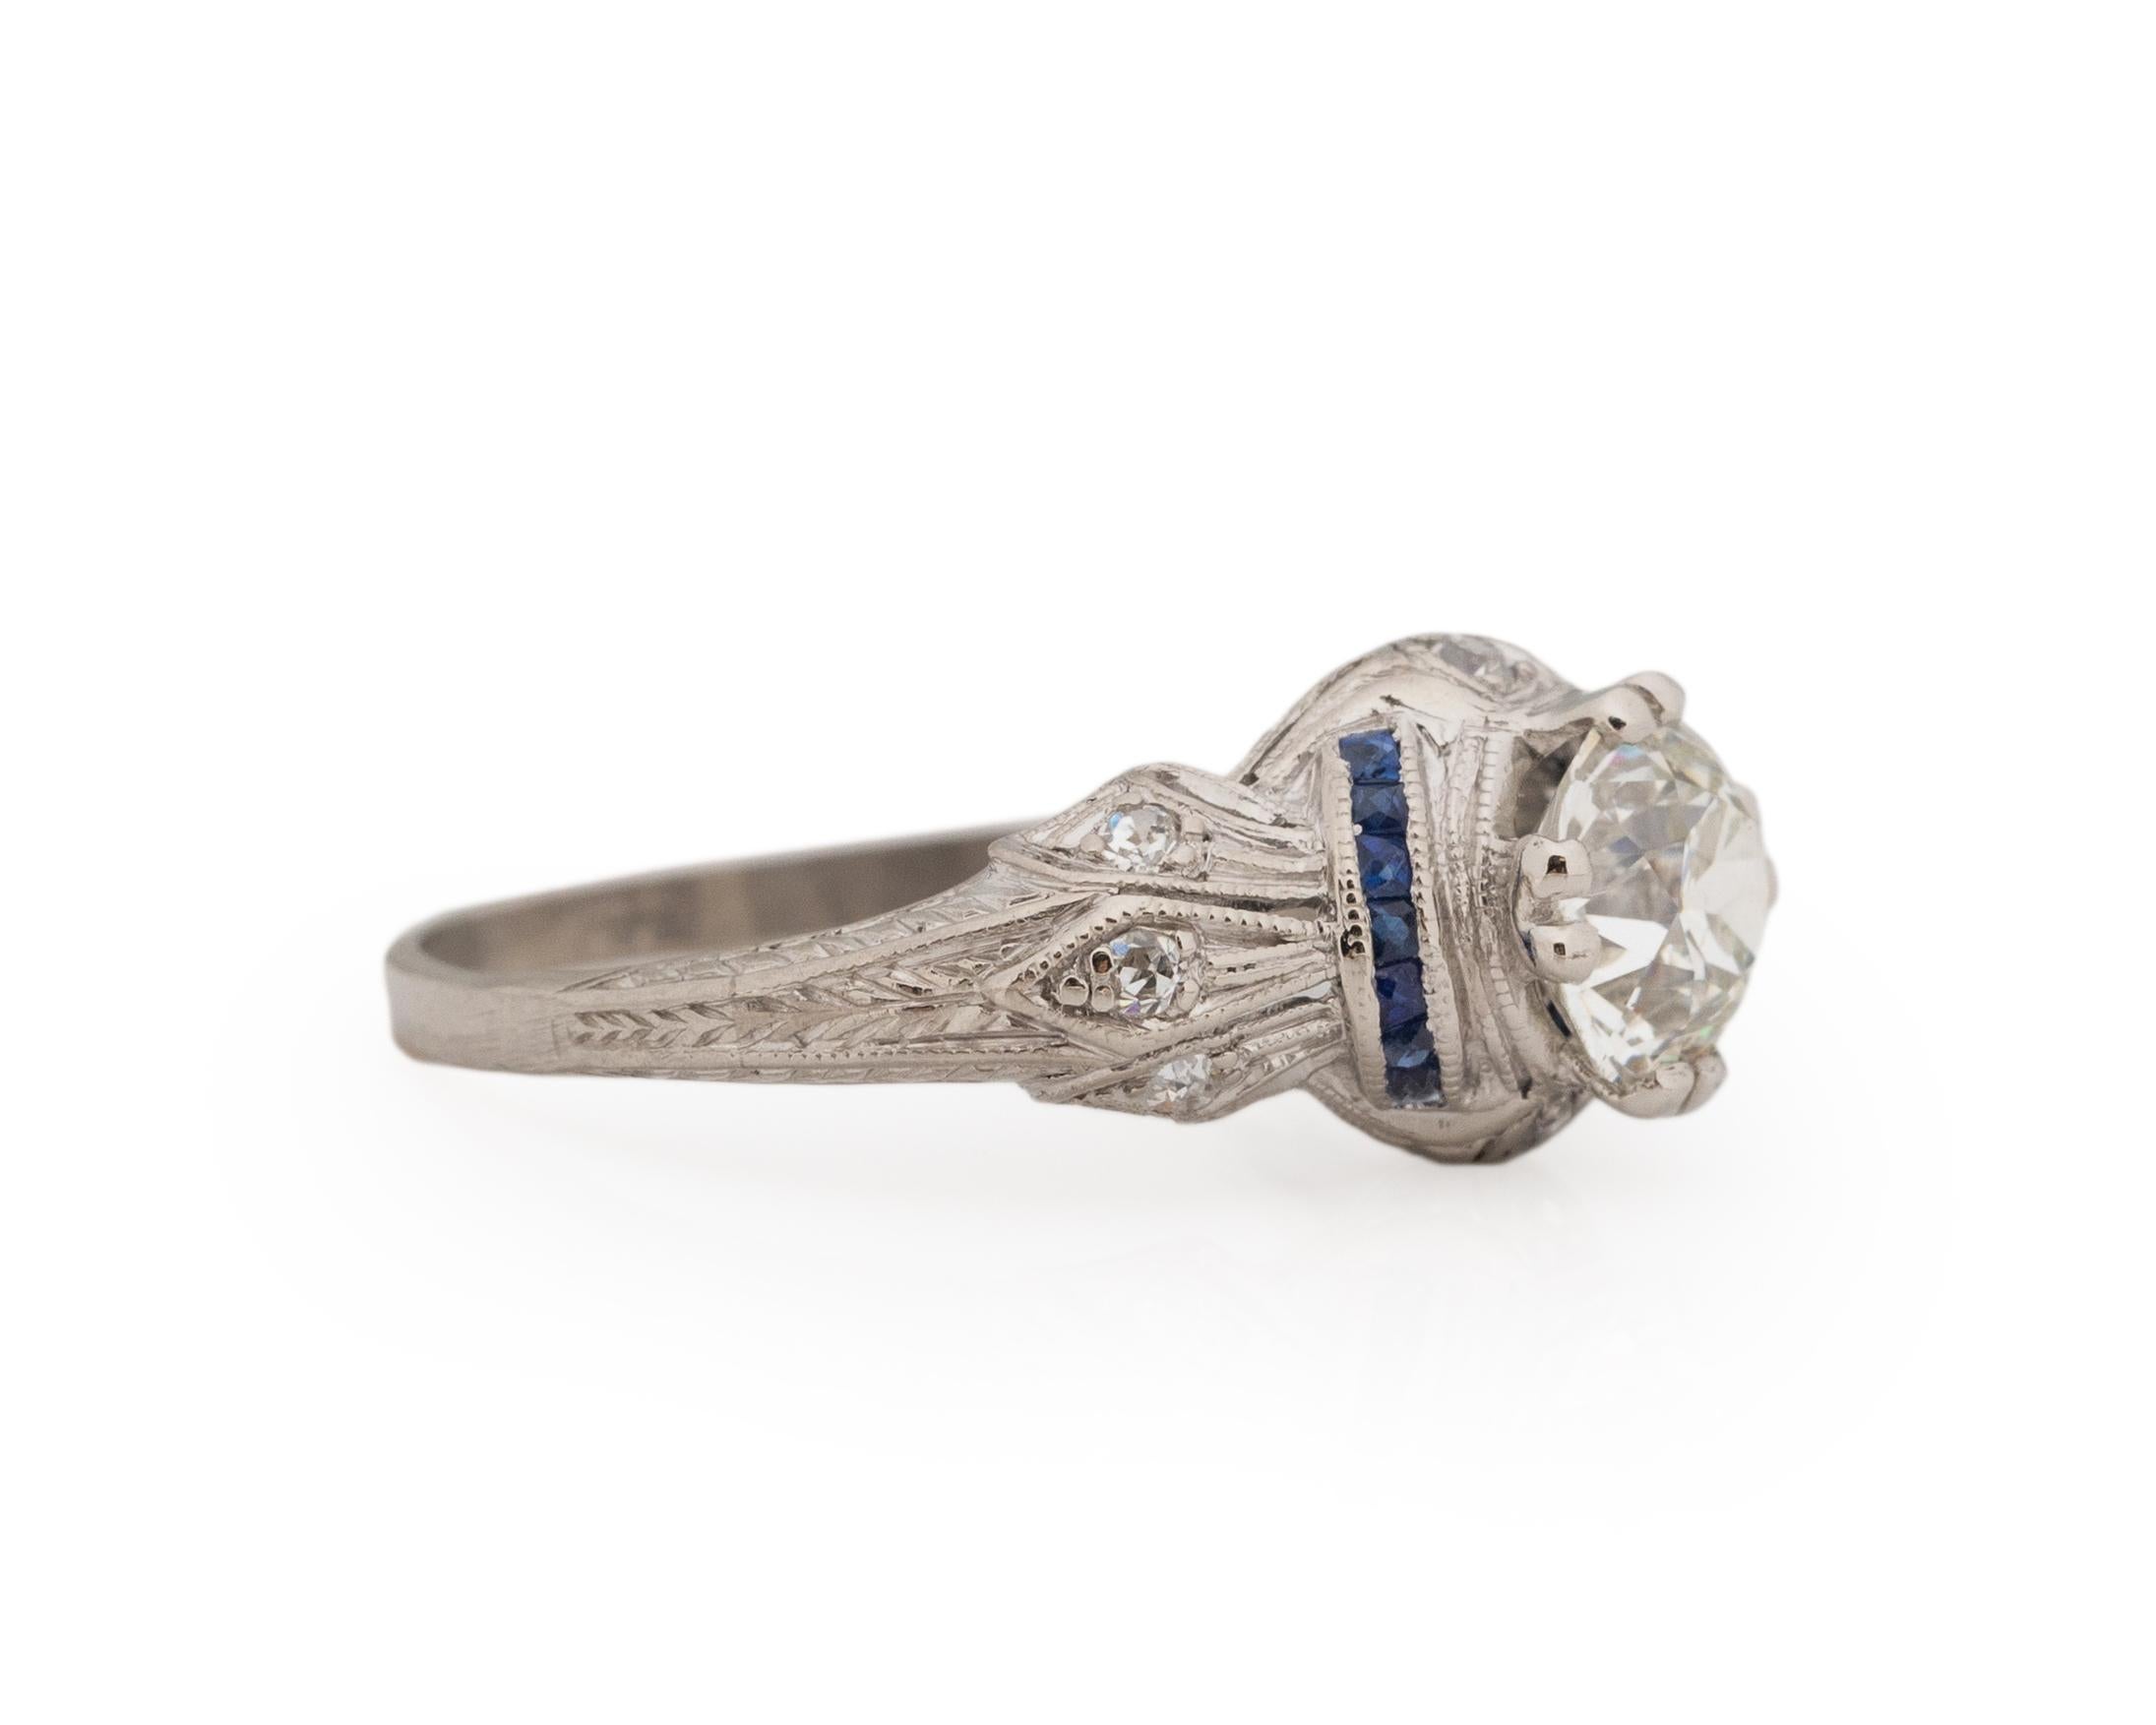 Ring Size: 7
Metal Type: Platinum [Hallmarked, and Tested]
Weight: 3.5 grams

Center Diamond Details:
GIA REPORT #: 2225175138
Weight: 1.22ct
Cut: Old European brilliant
Color: J
Clarity: VS2
Measurements: 7.01mm x 6.59mm x 4.18mm

Side Stone